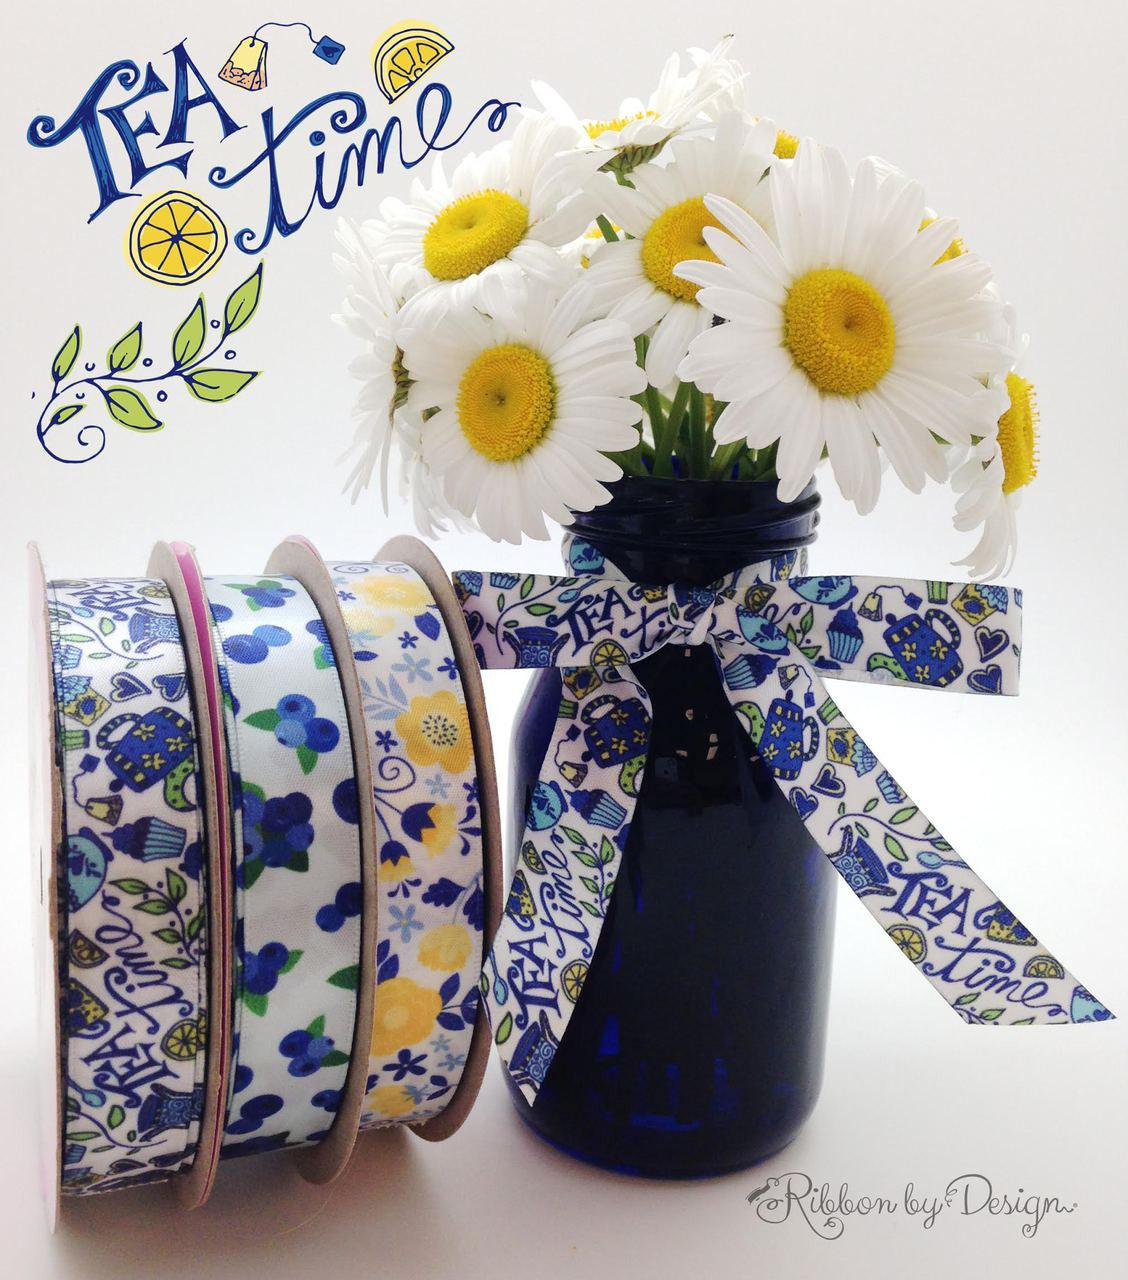 Our tea time ribbon makes a wonderful mix with our other Summer tea time ribbons!